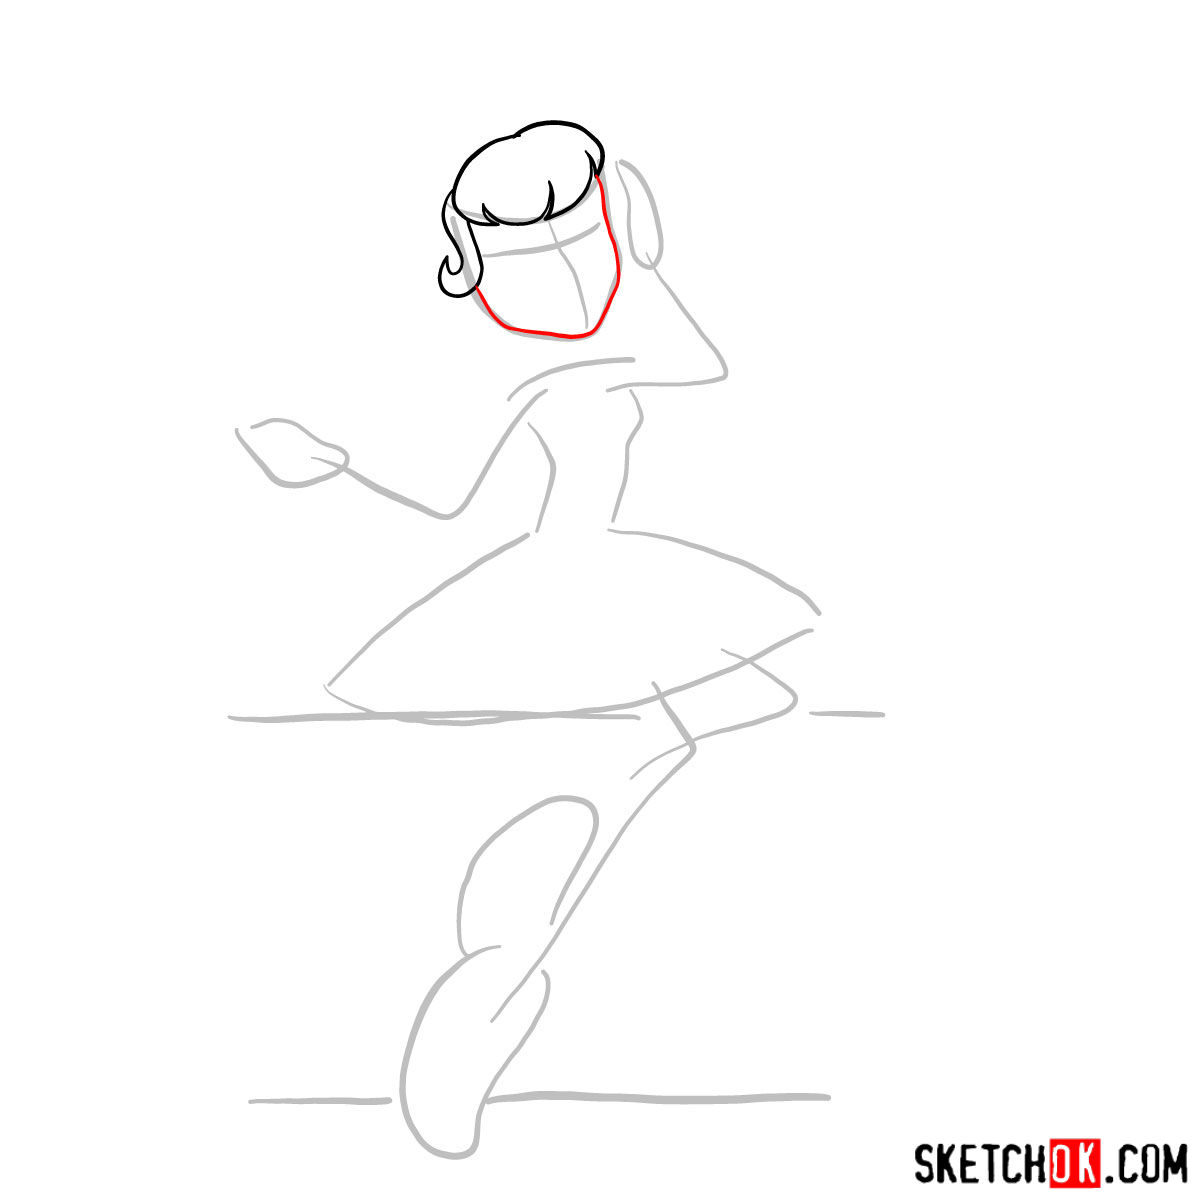 How to draw C.A. Cupid step by step - step 03